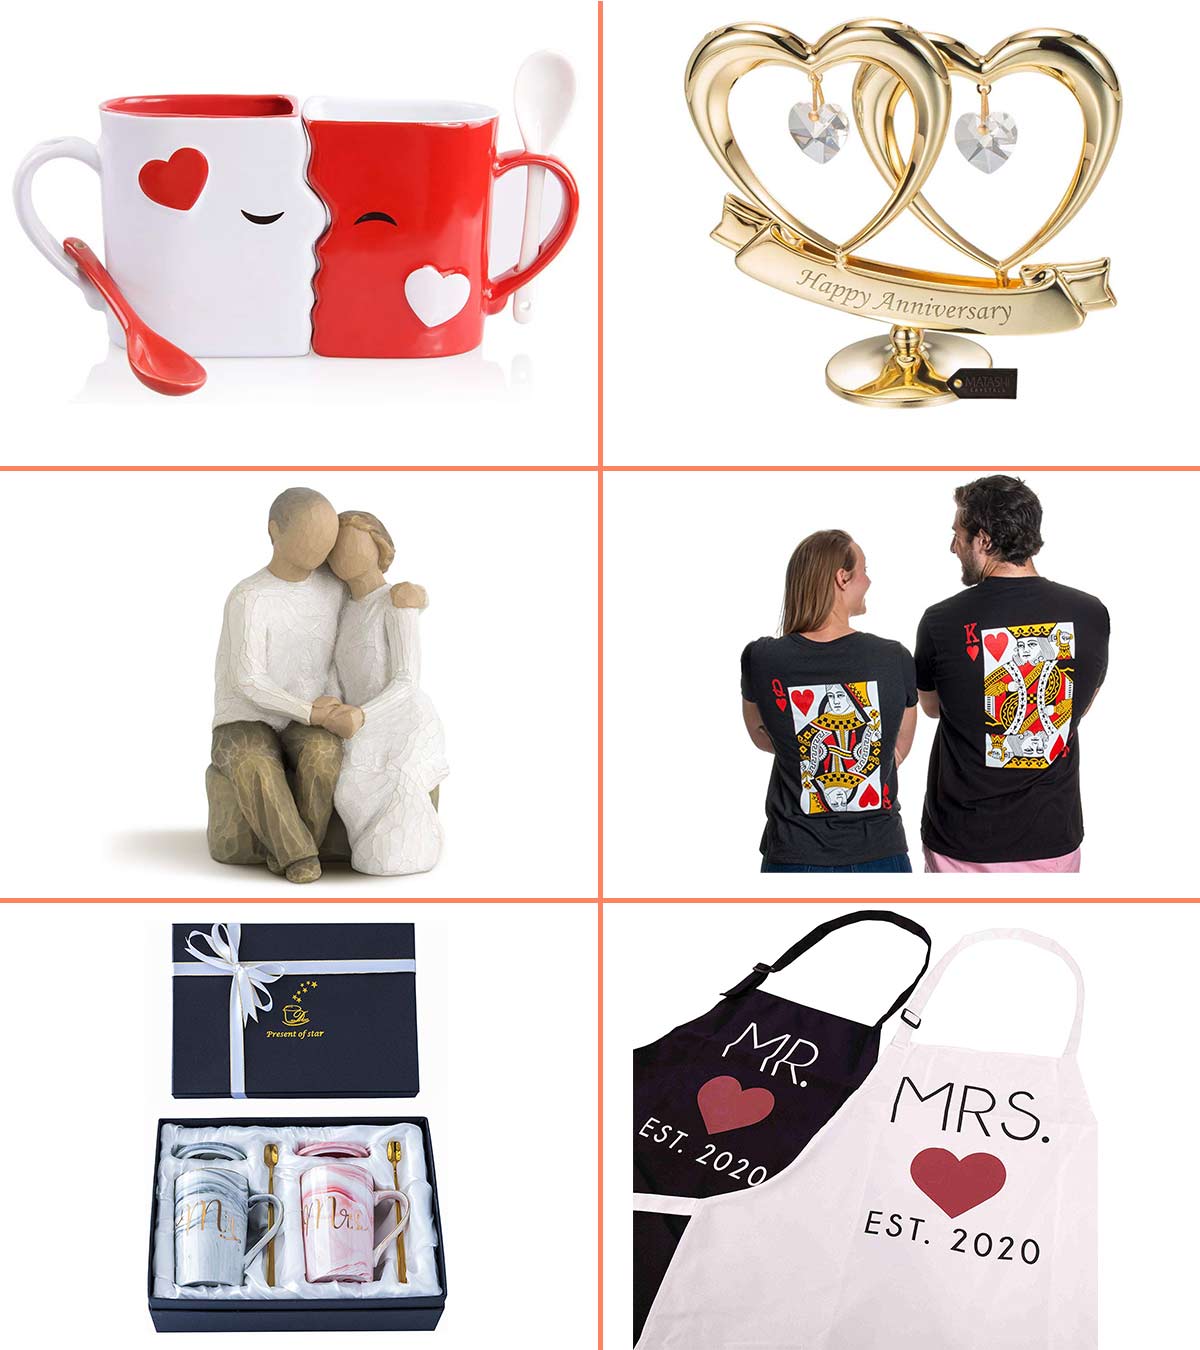 14 Great Wedding Gifts That You Wont Find on the Couples Registry   Reviews by Wirecutter